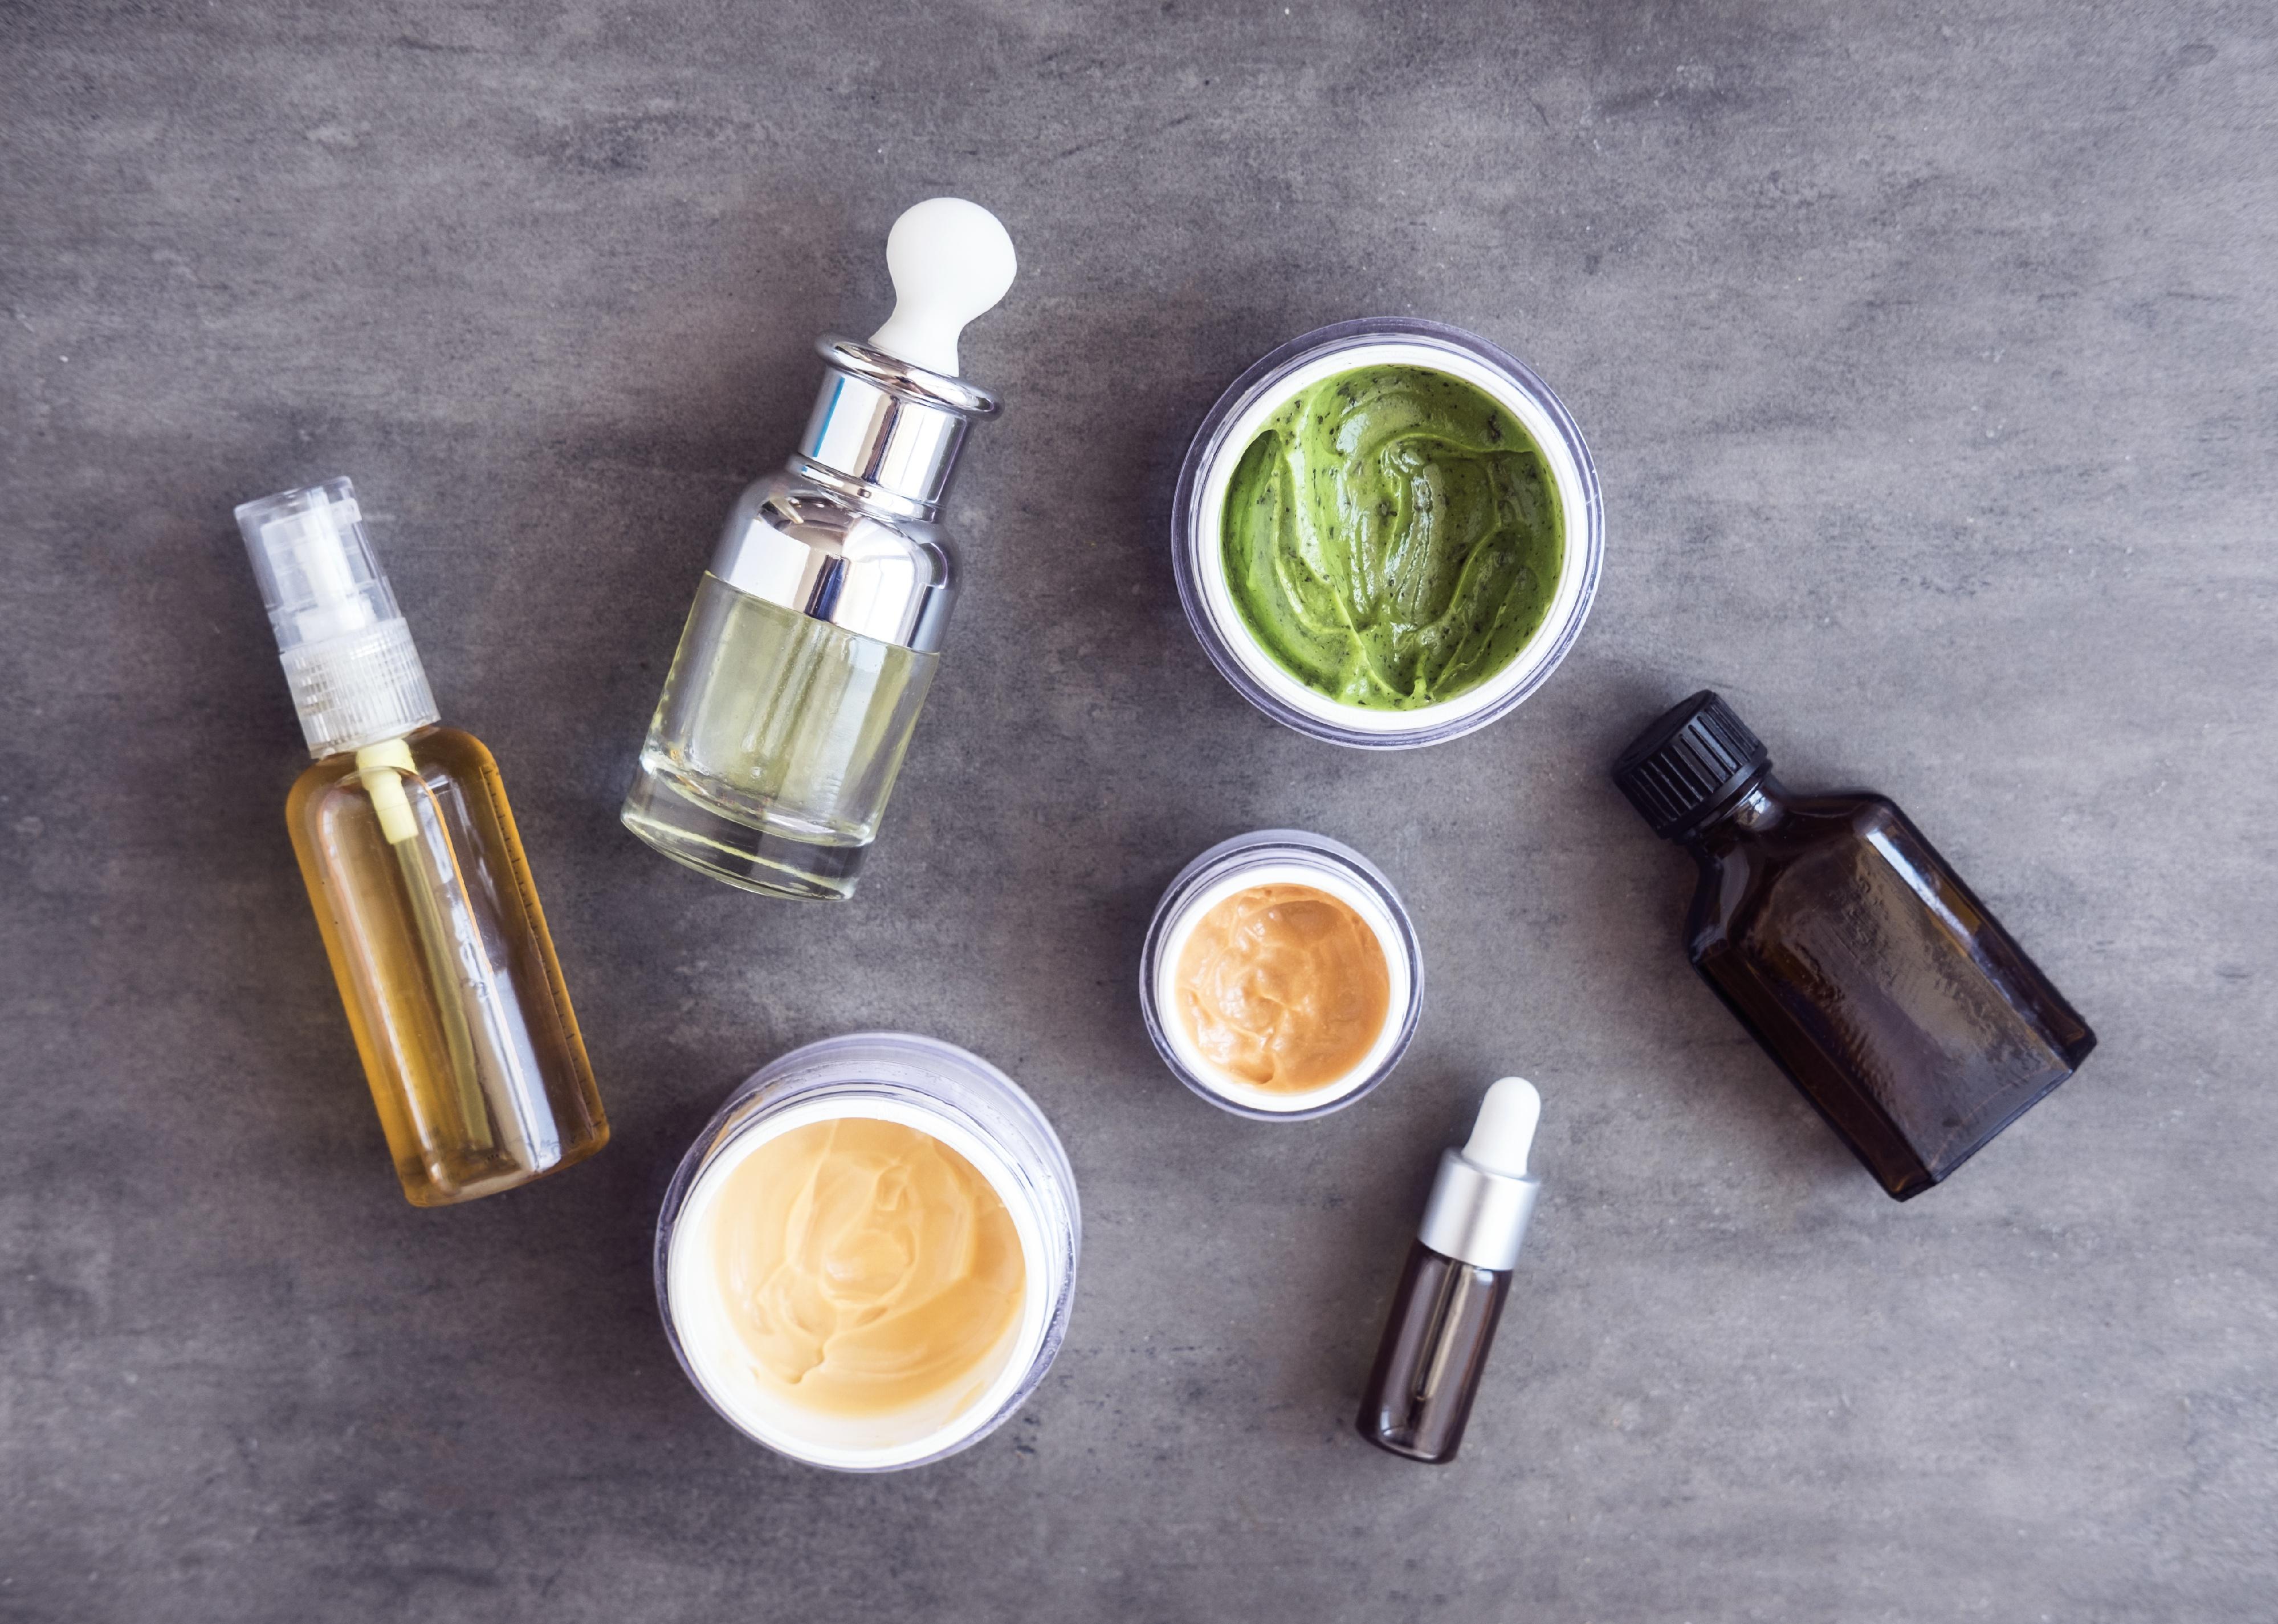 Bottles and jars with skincare cosmetics.